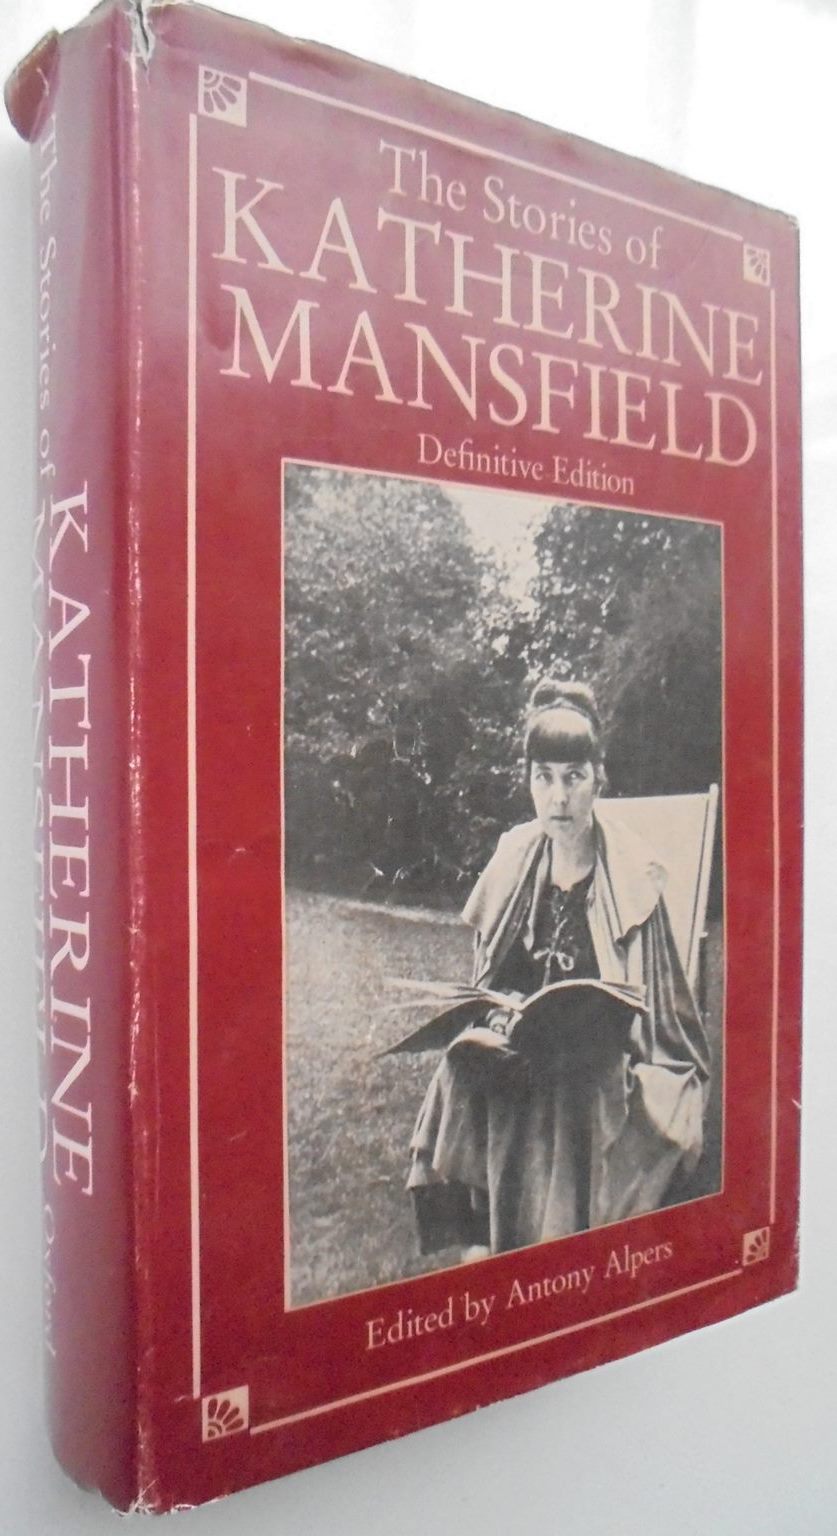 The Stories of Katherine Mansfield. Edited by Anthony Alpers - Definitive edition